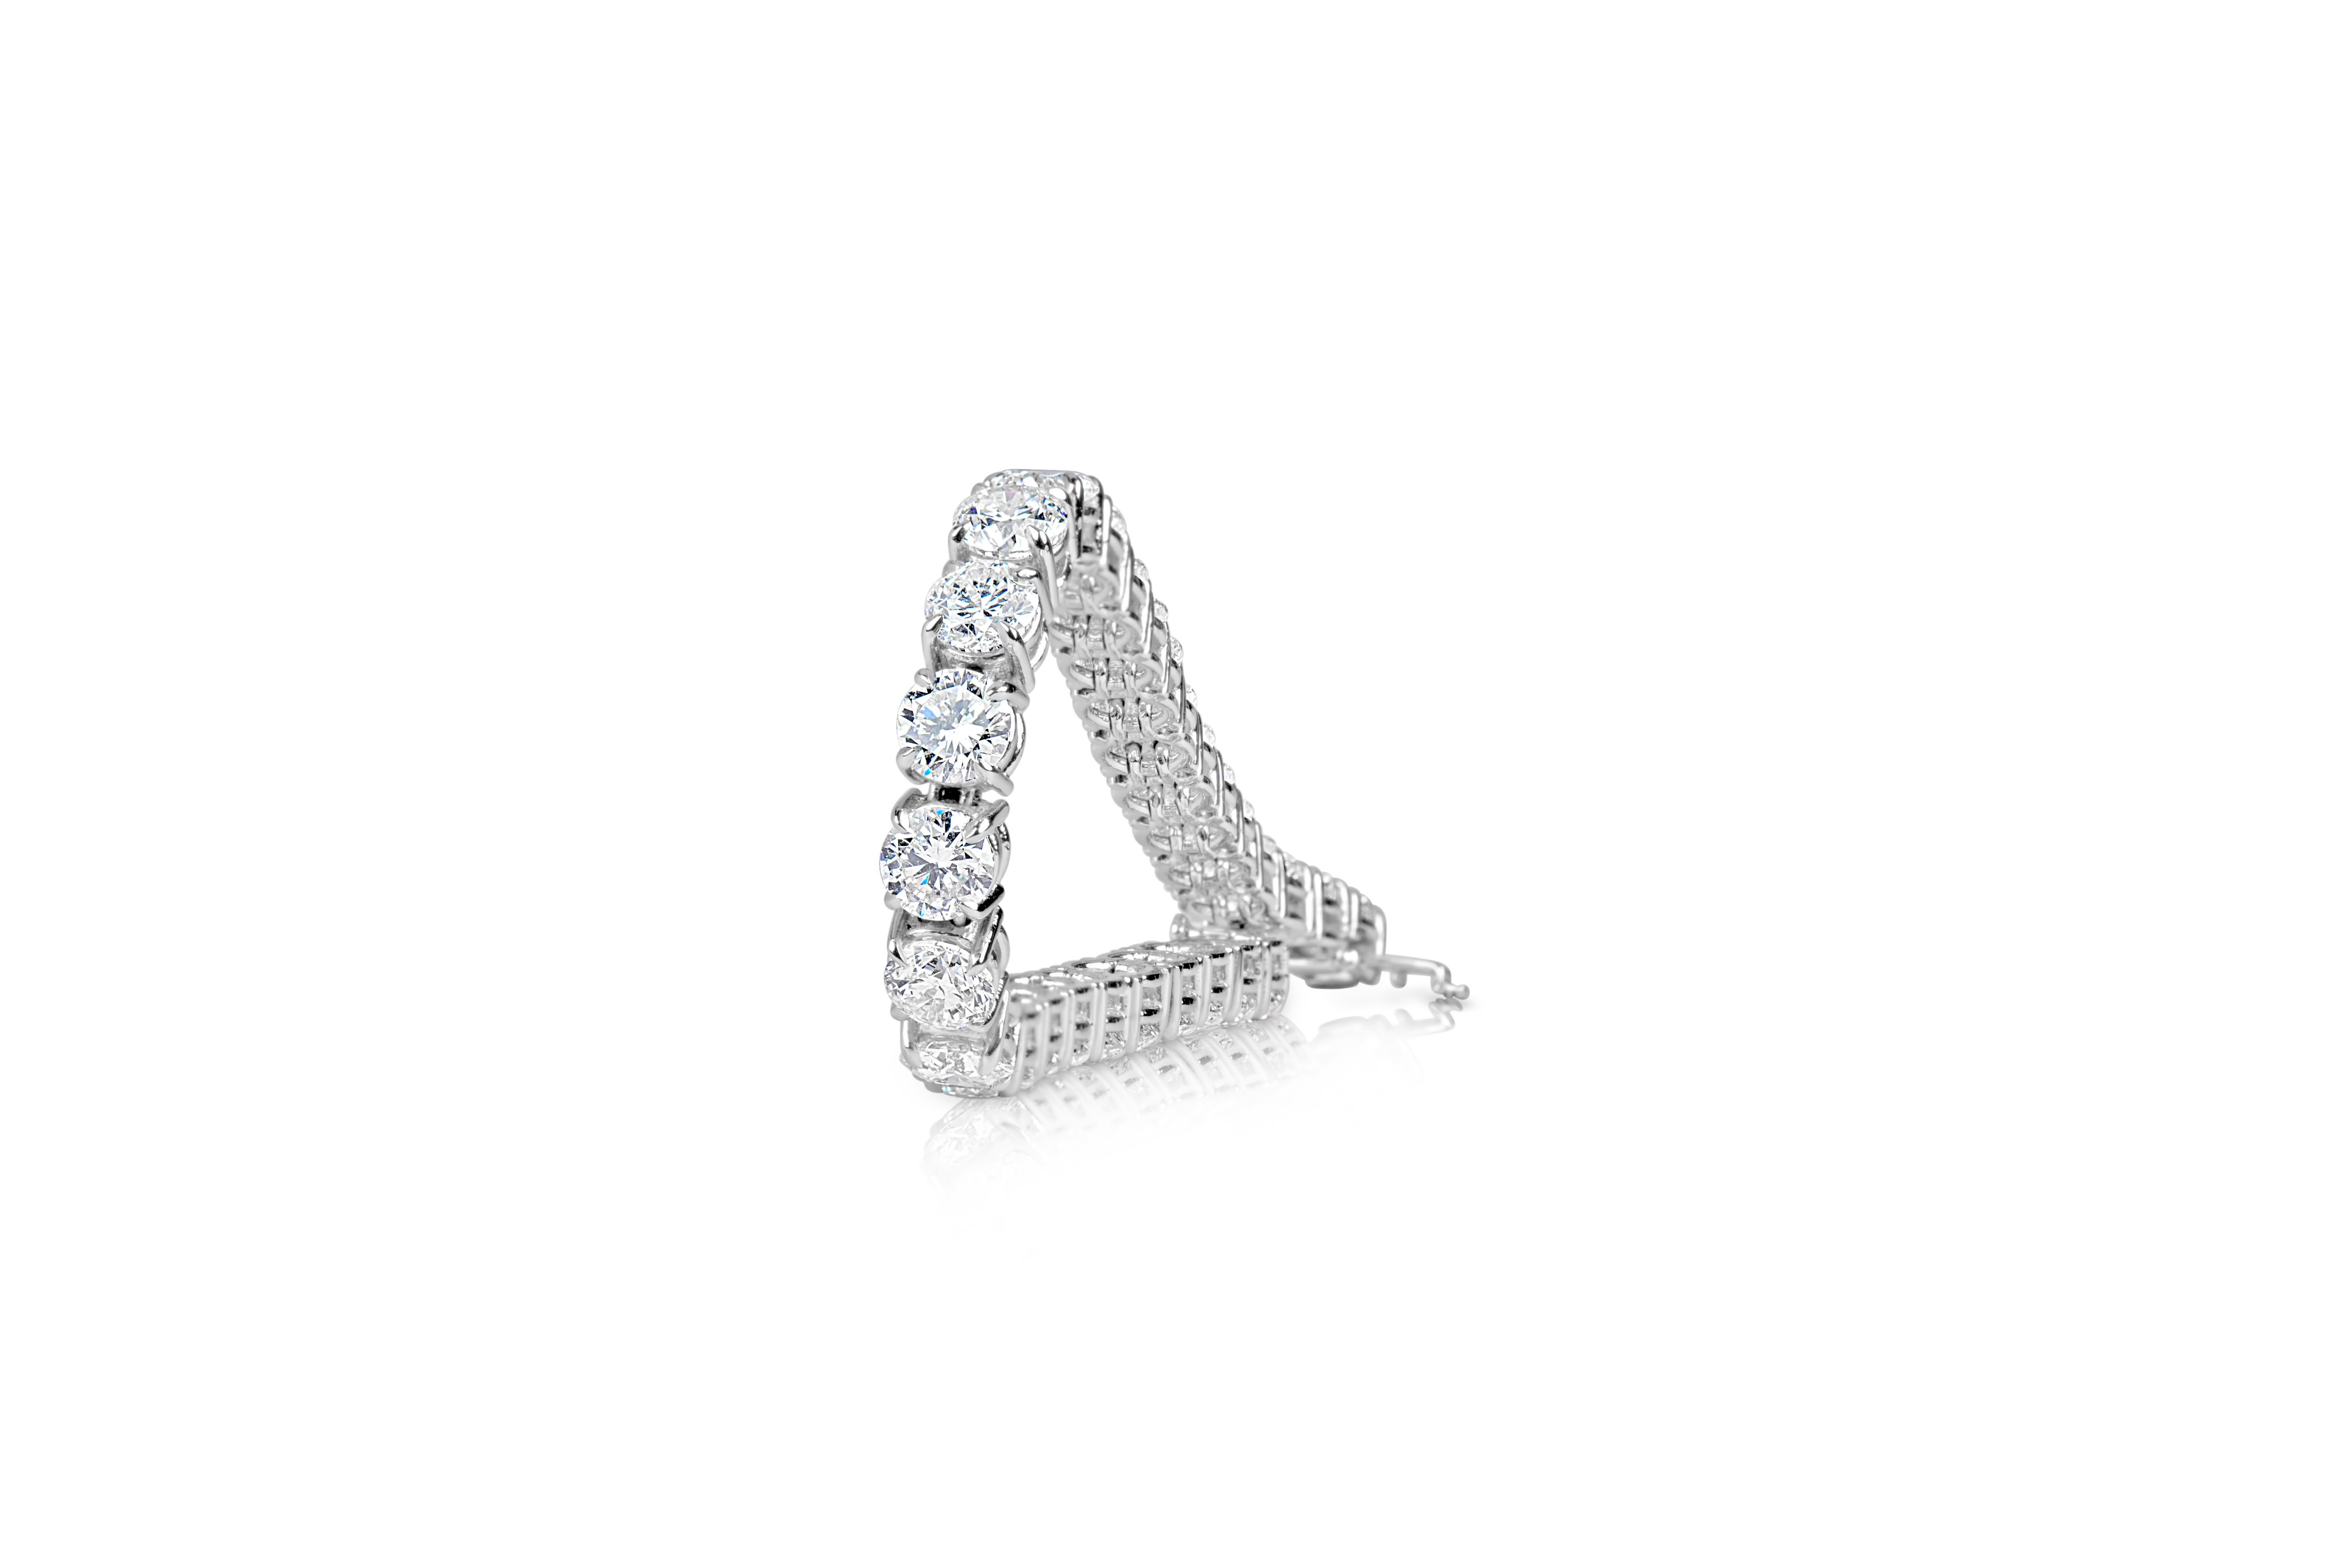 Diamond Tennis Bracelet featuring:
Gold: 18K White Gold
Diamond Count: 35
Diamond Weight: 18 Cts 
Appr. 0.50 Cts. each
Color : F /G
Clarity: SI1-SI2
The Bracelet was appraised and certified by a GIA Gemologist from the AGI company